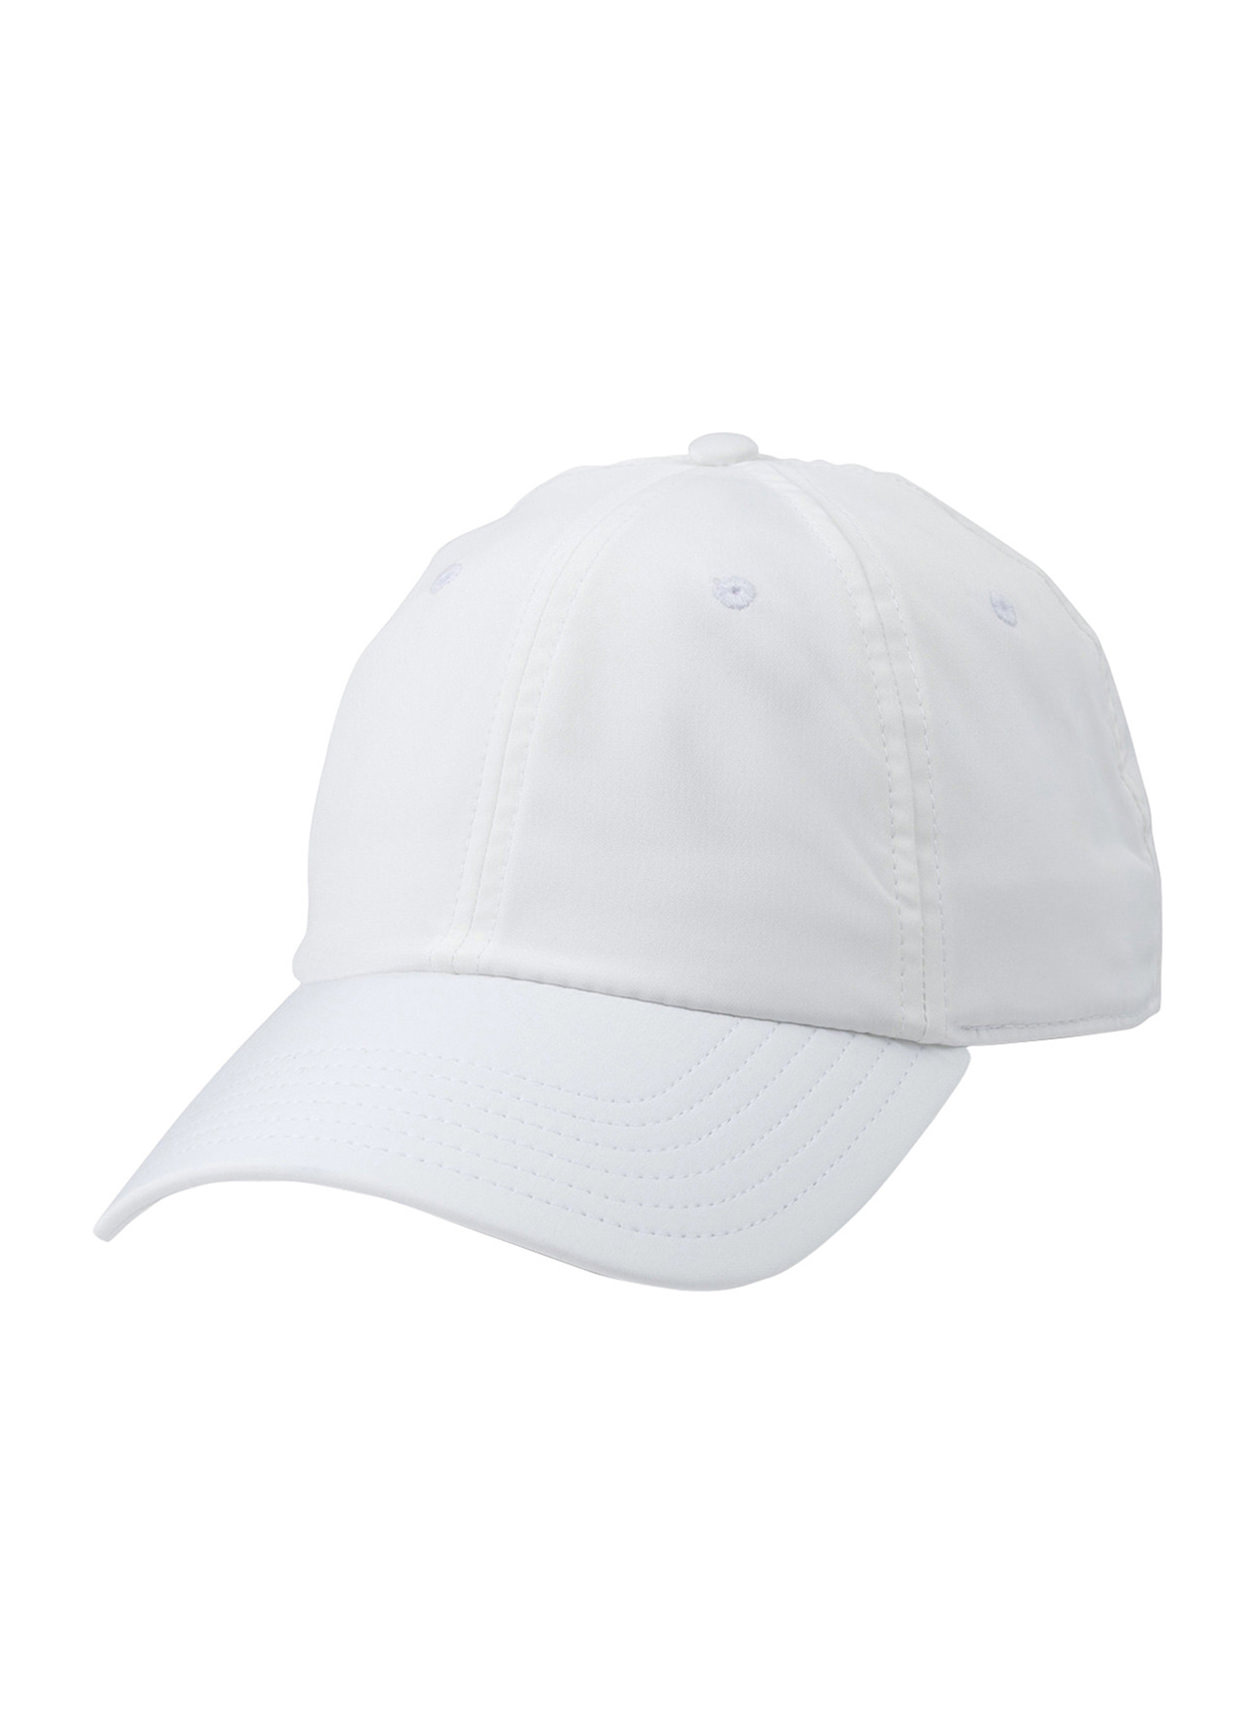 Southern Tide White Performance Hat